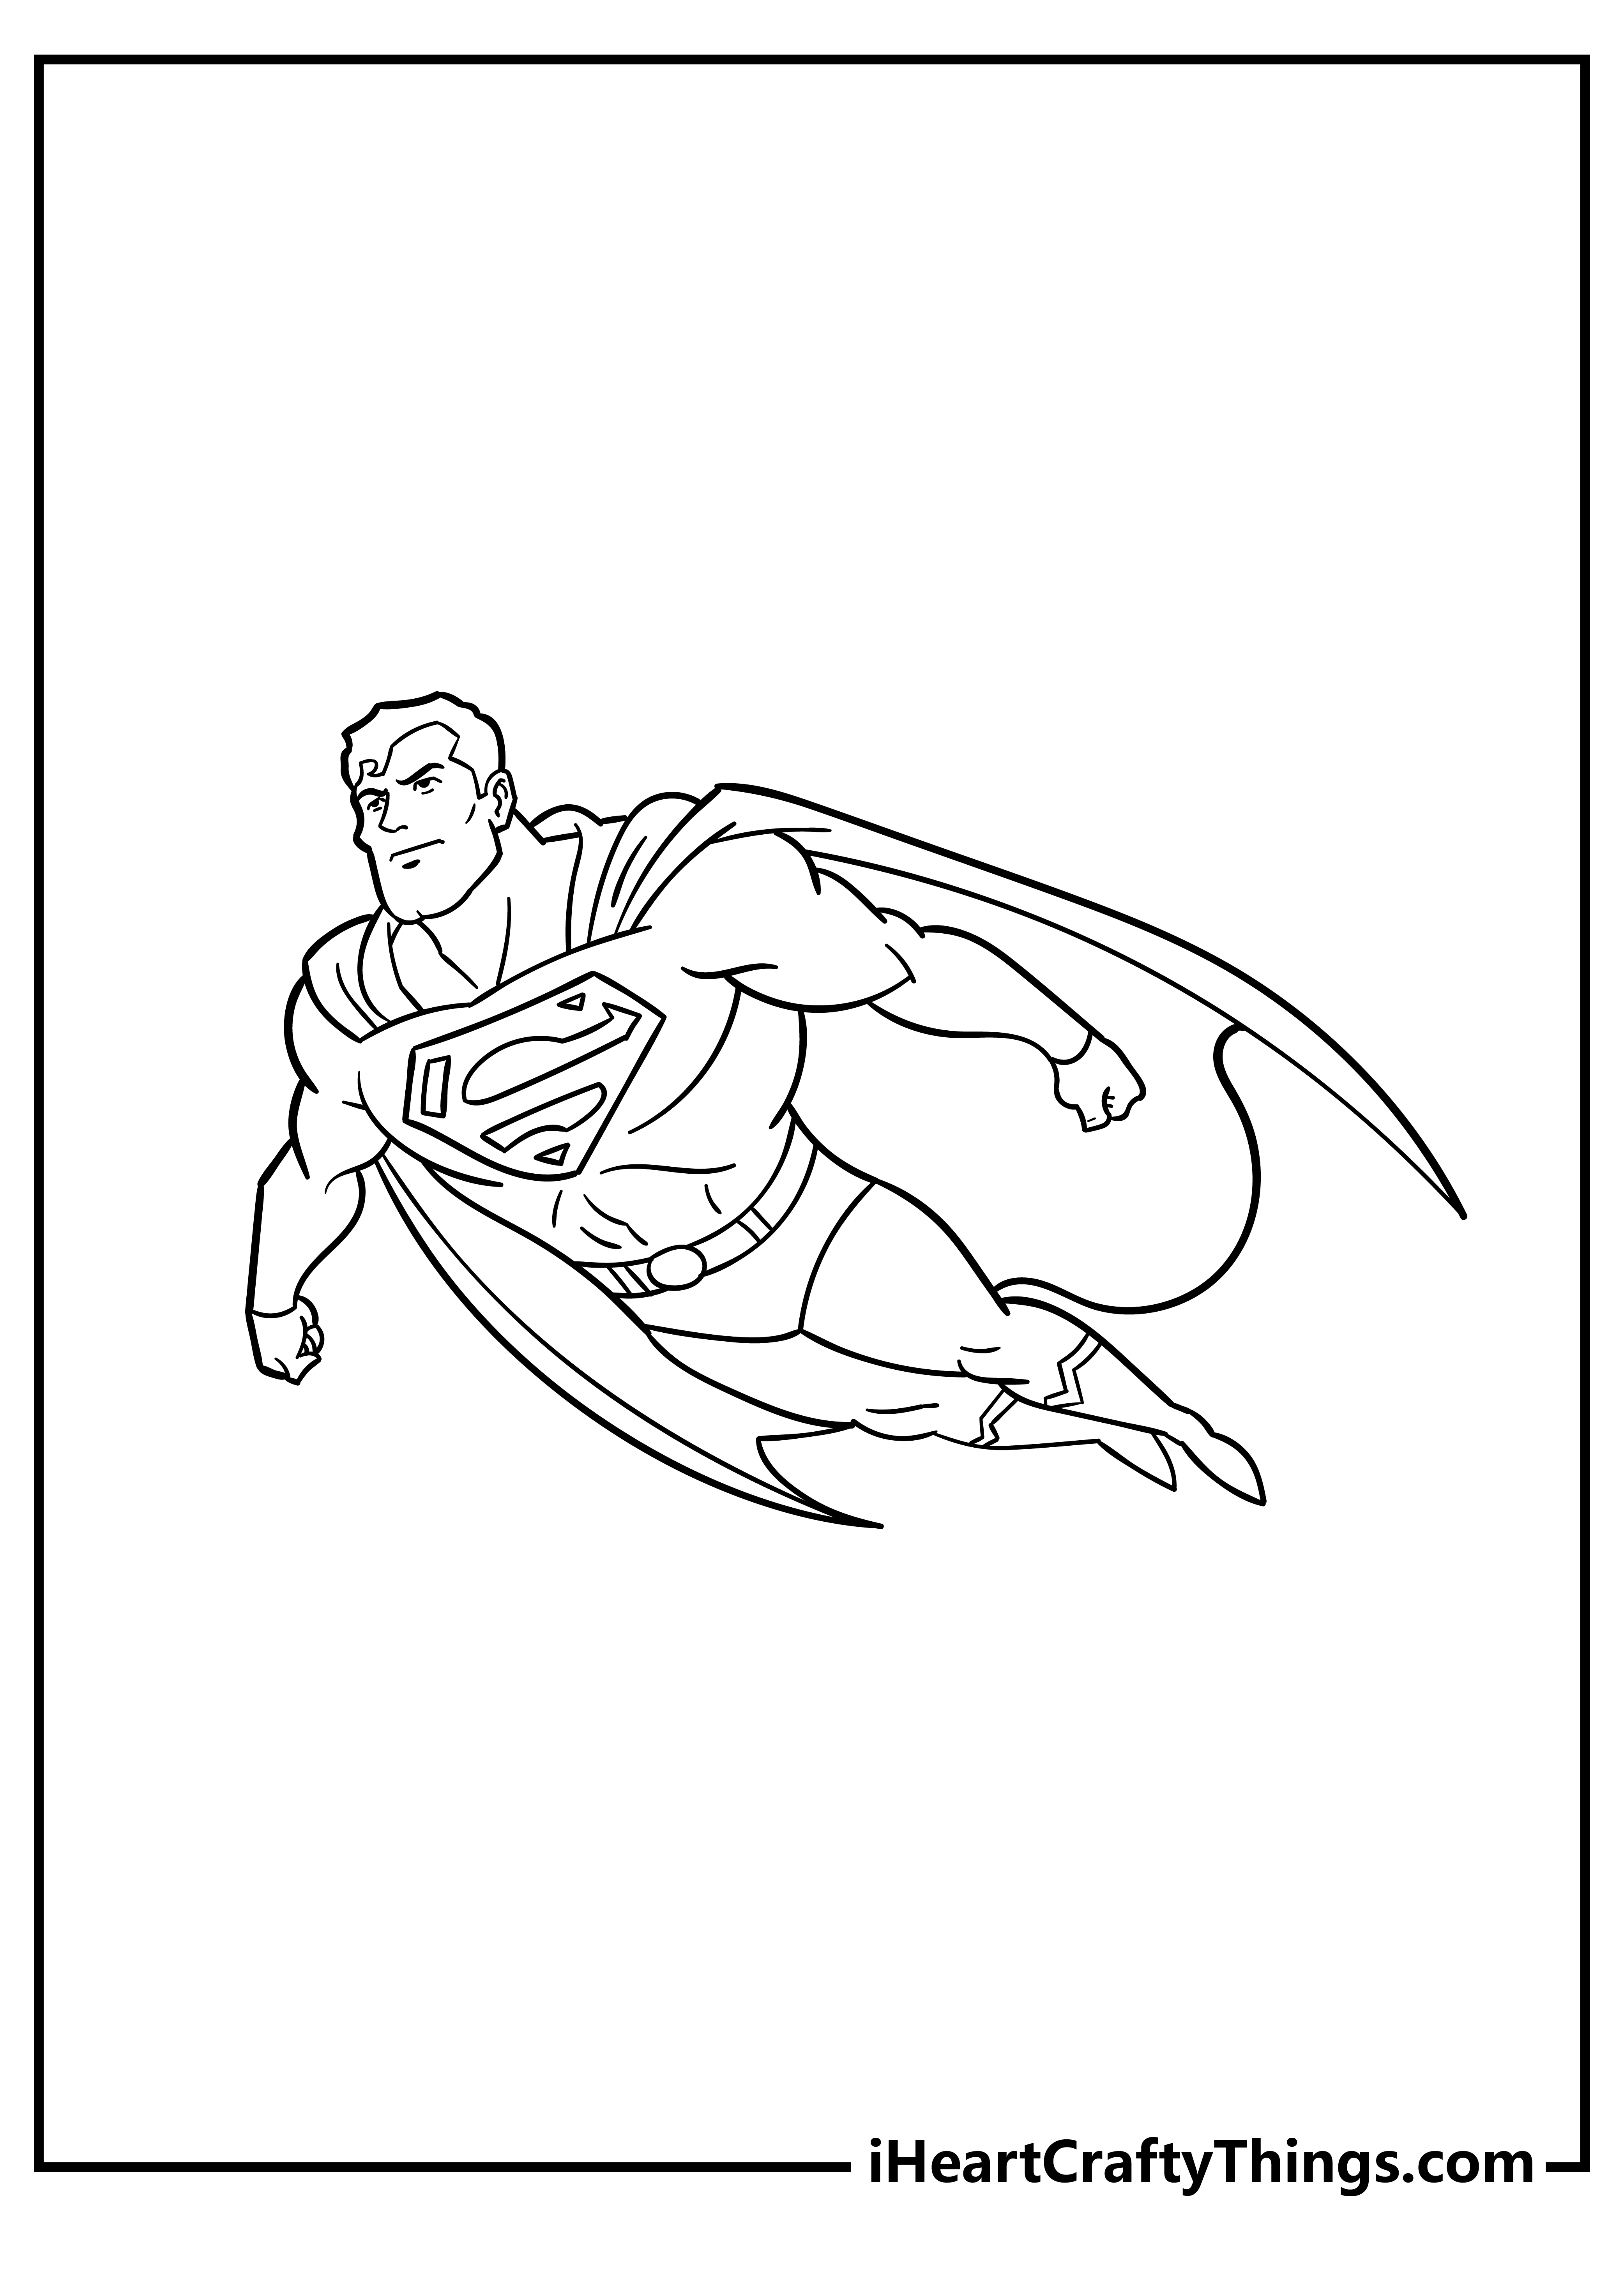 Superman coloring pages free printables